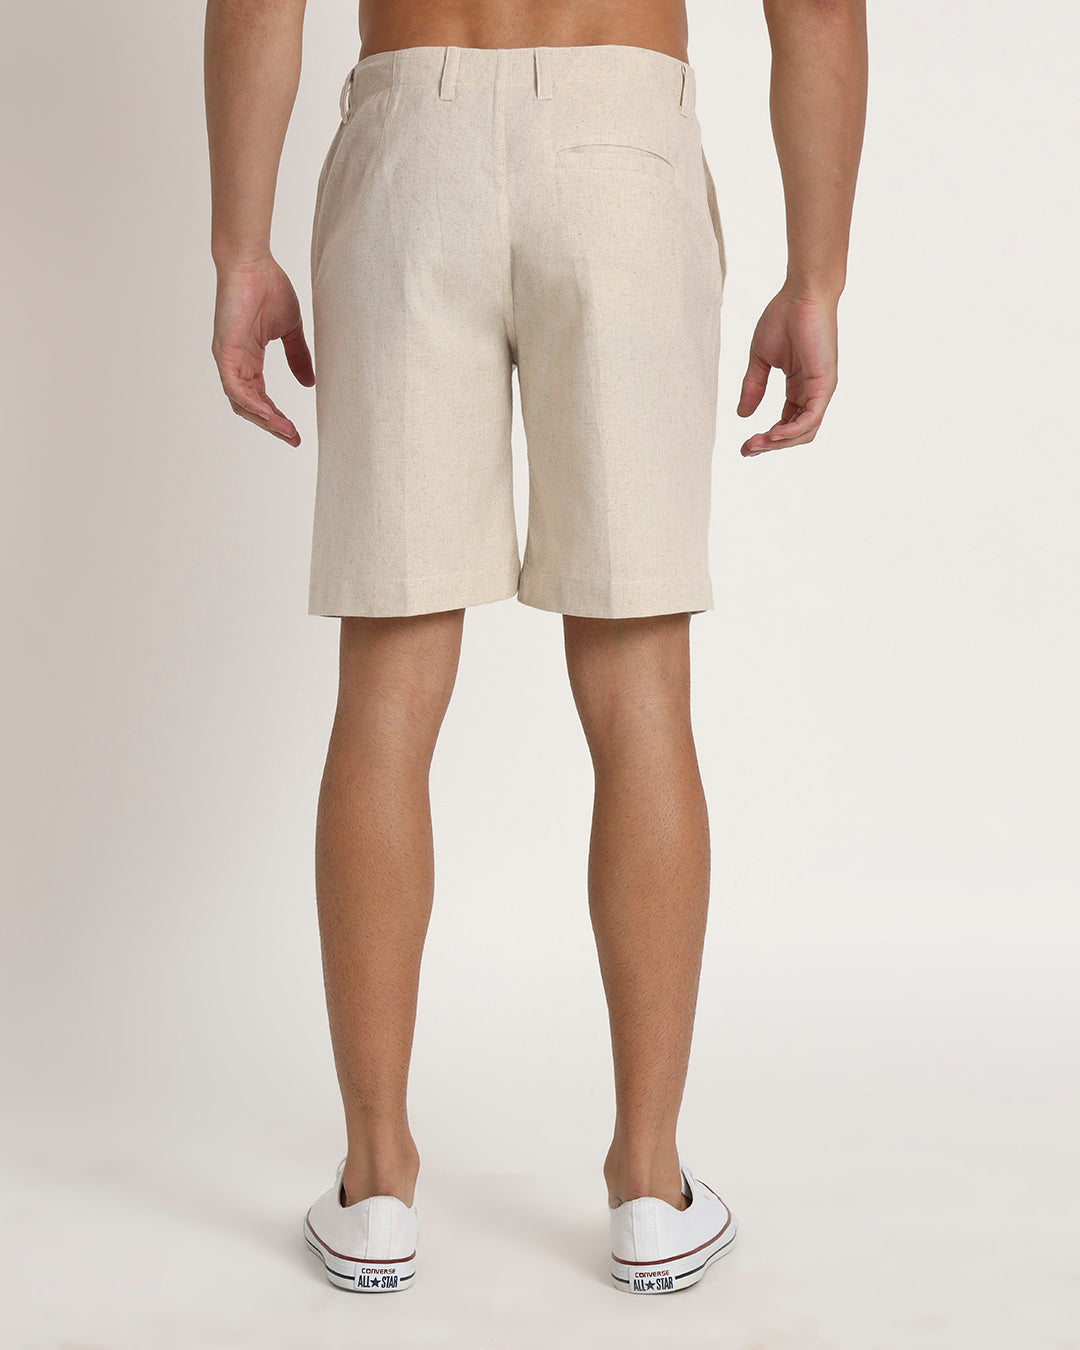 Ready For Anything Beige Men's Shorts